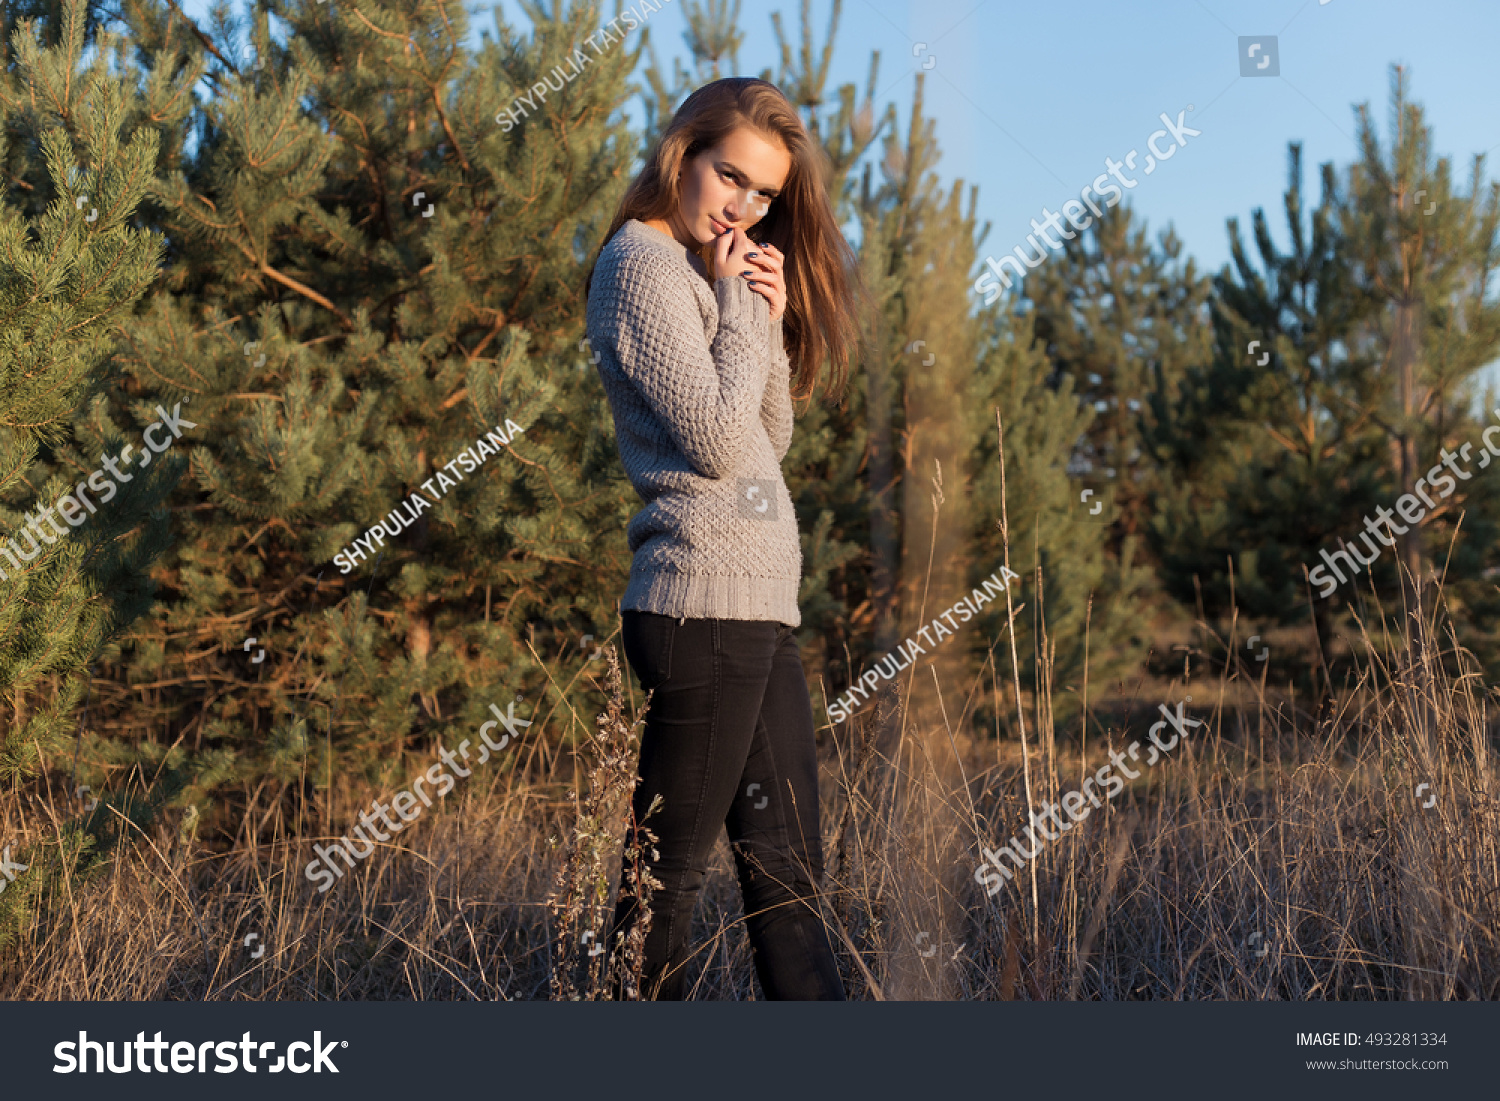 Beautiful Lonely Young Girl Big Eyes Stock Photo 493281334 - Shutterstock-3151